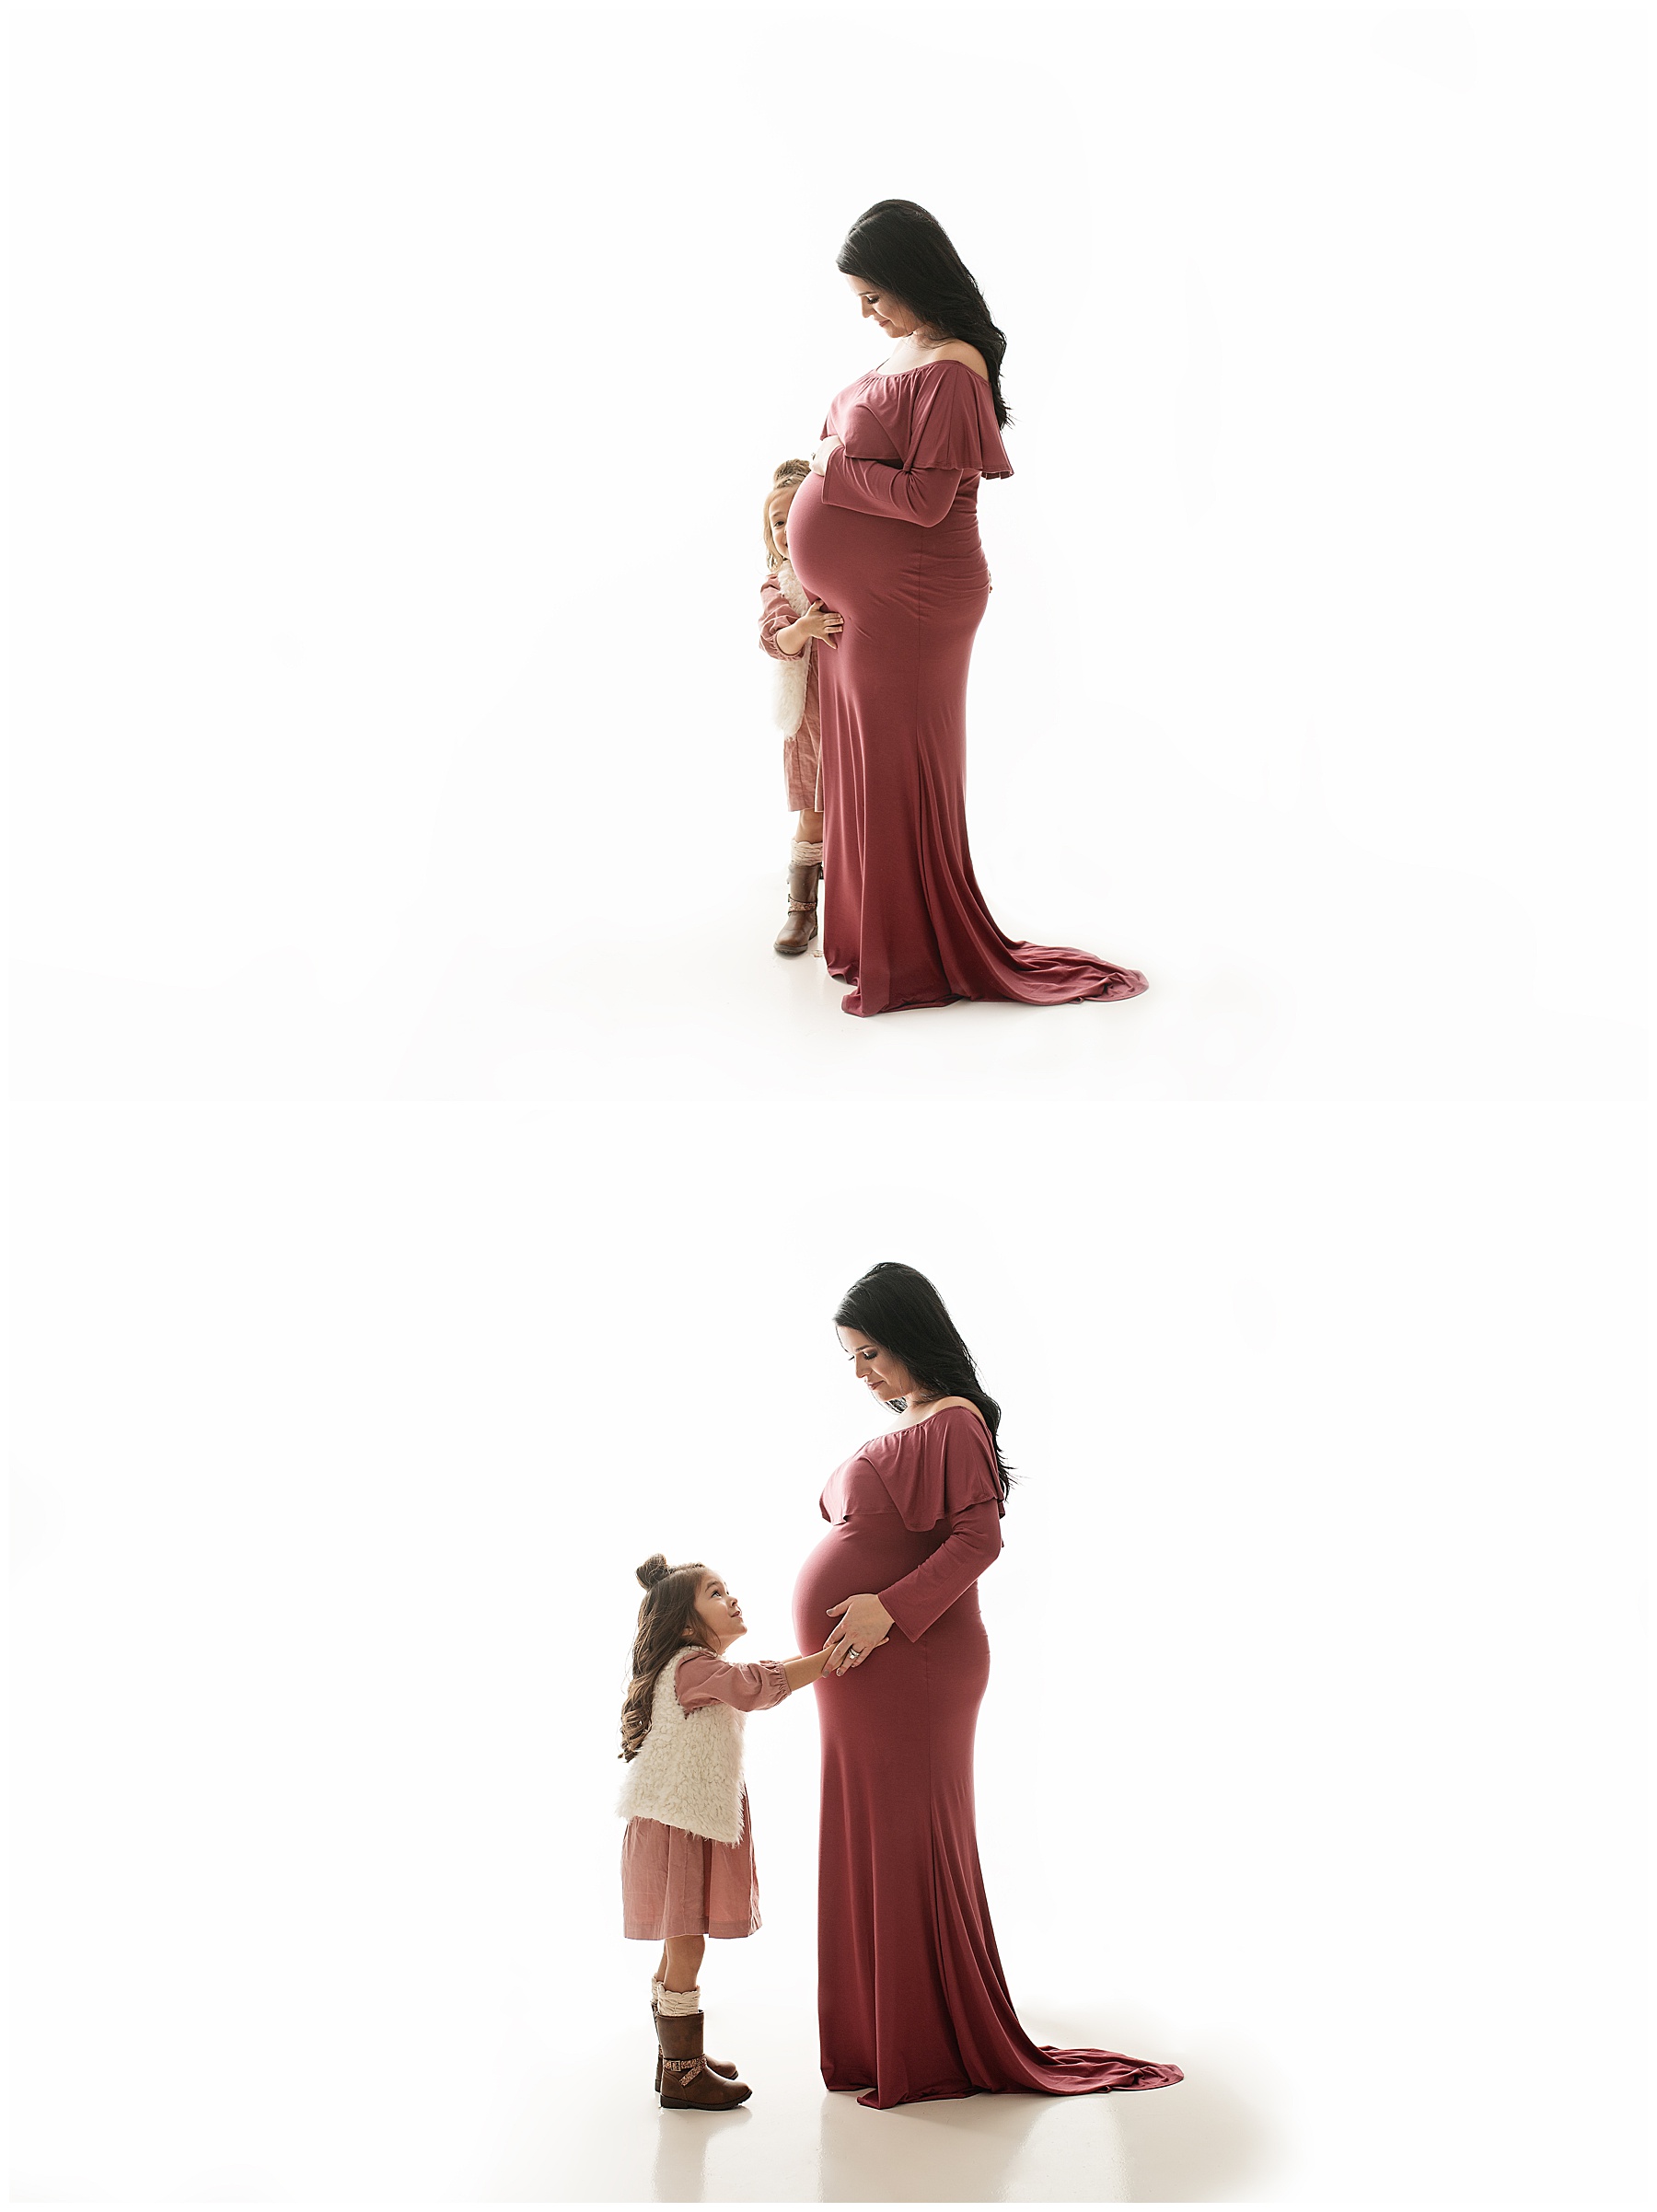 mom and daughter looking down at her pregnant belly